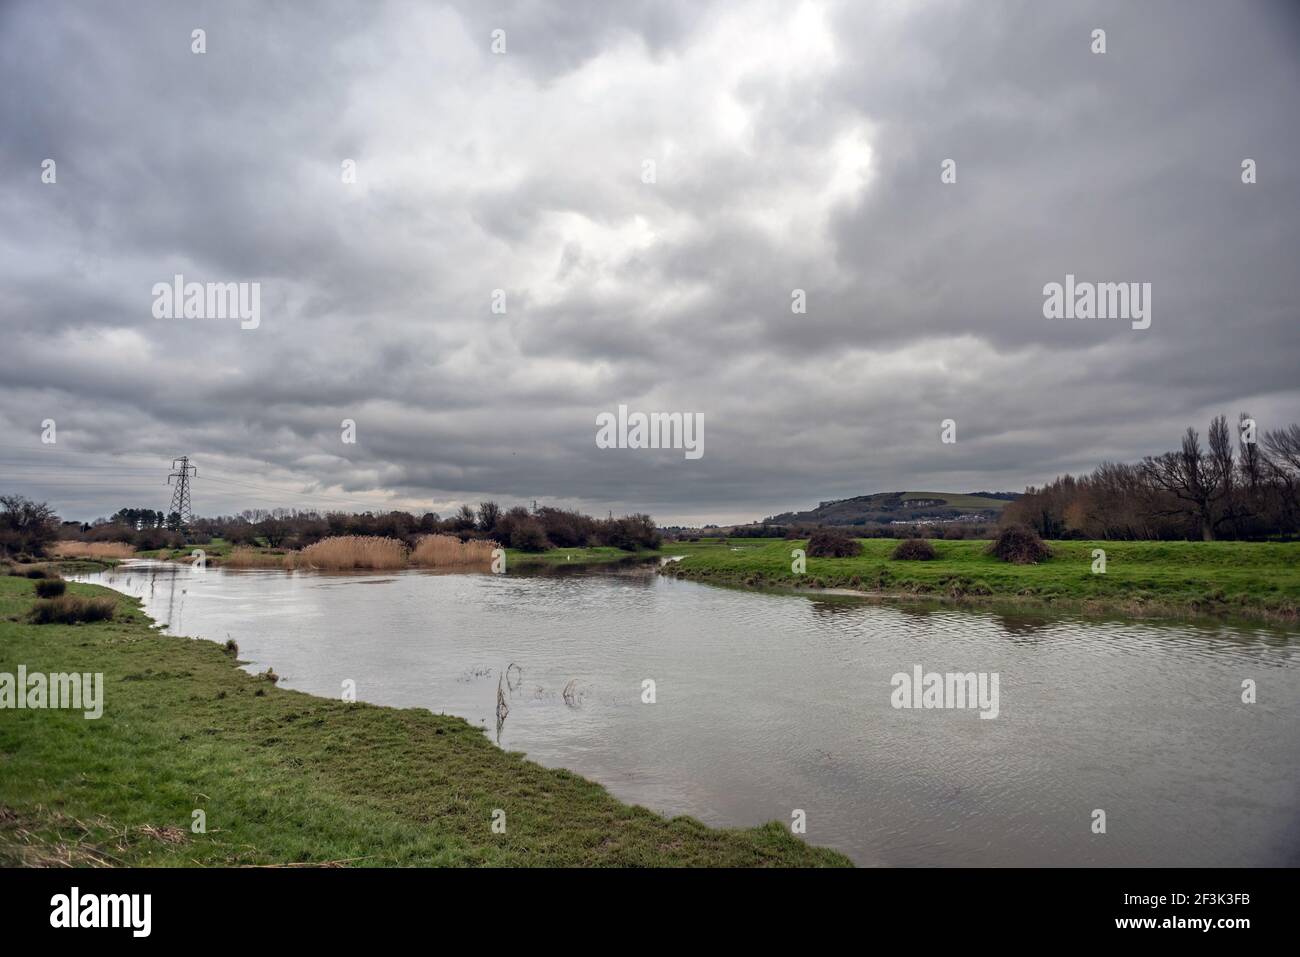 Lewes, March 4th 2021: The River Ouse running through Lewes in East Sussex Stock Photo